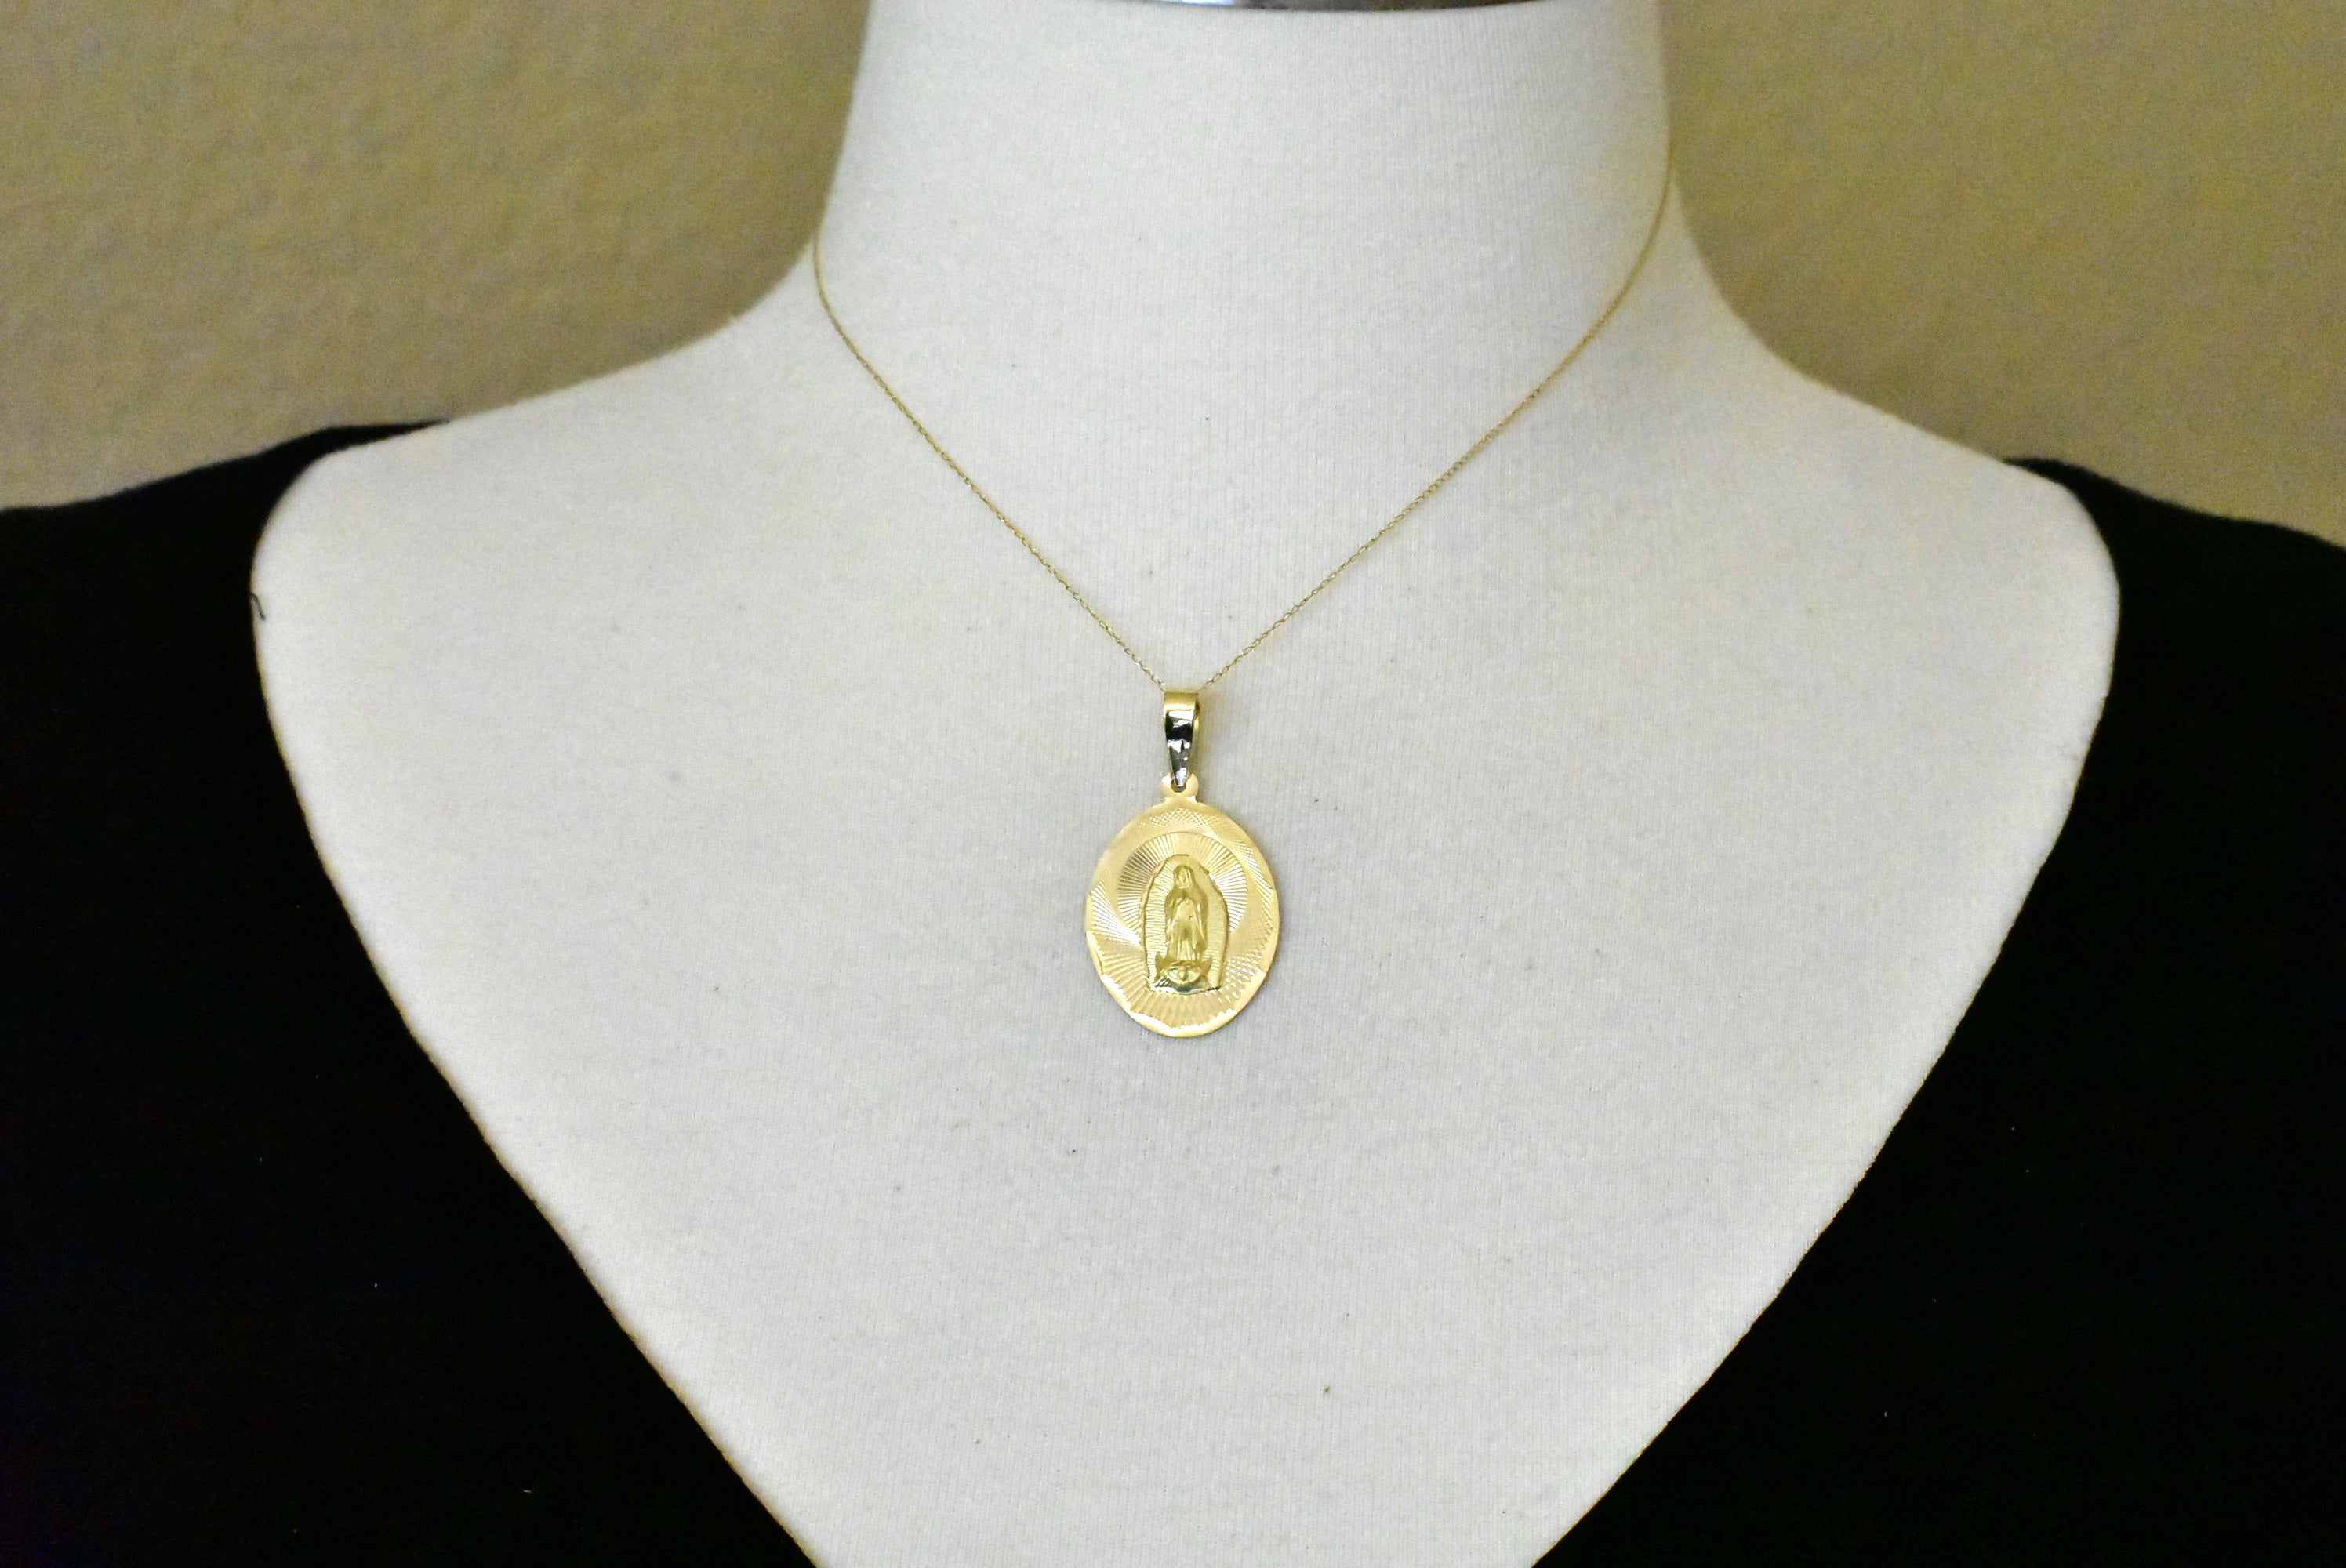 14k Yellow Gold Our Lady of Guadalupe Oval Pendant Charm